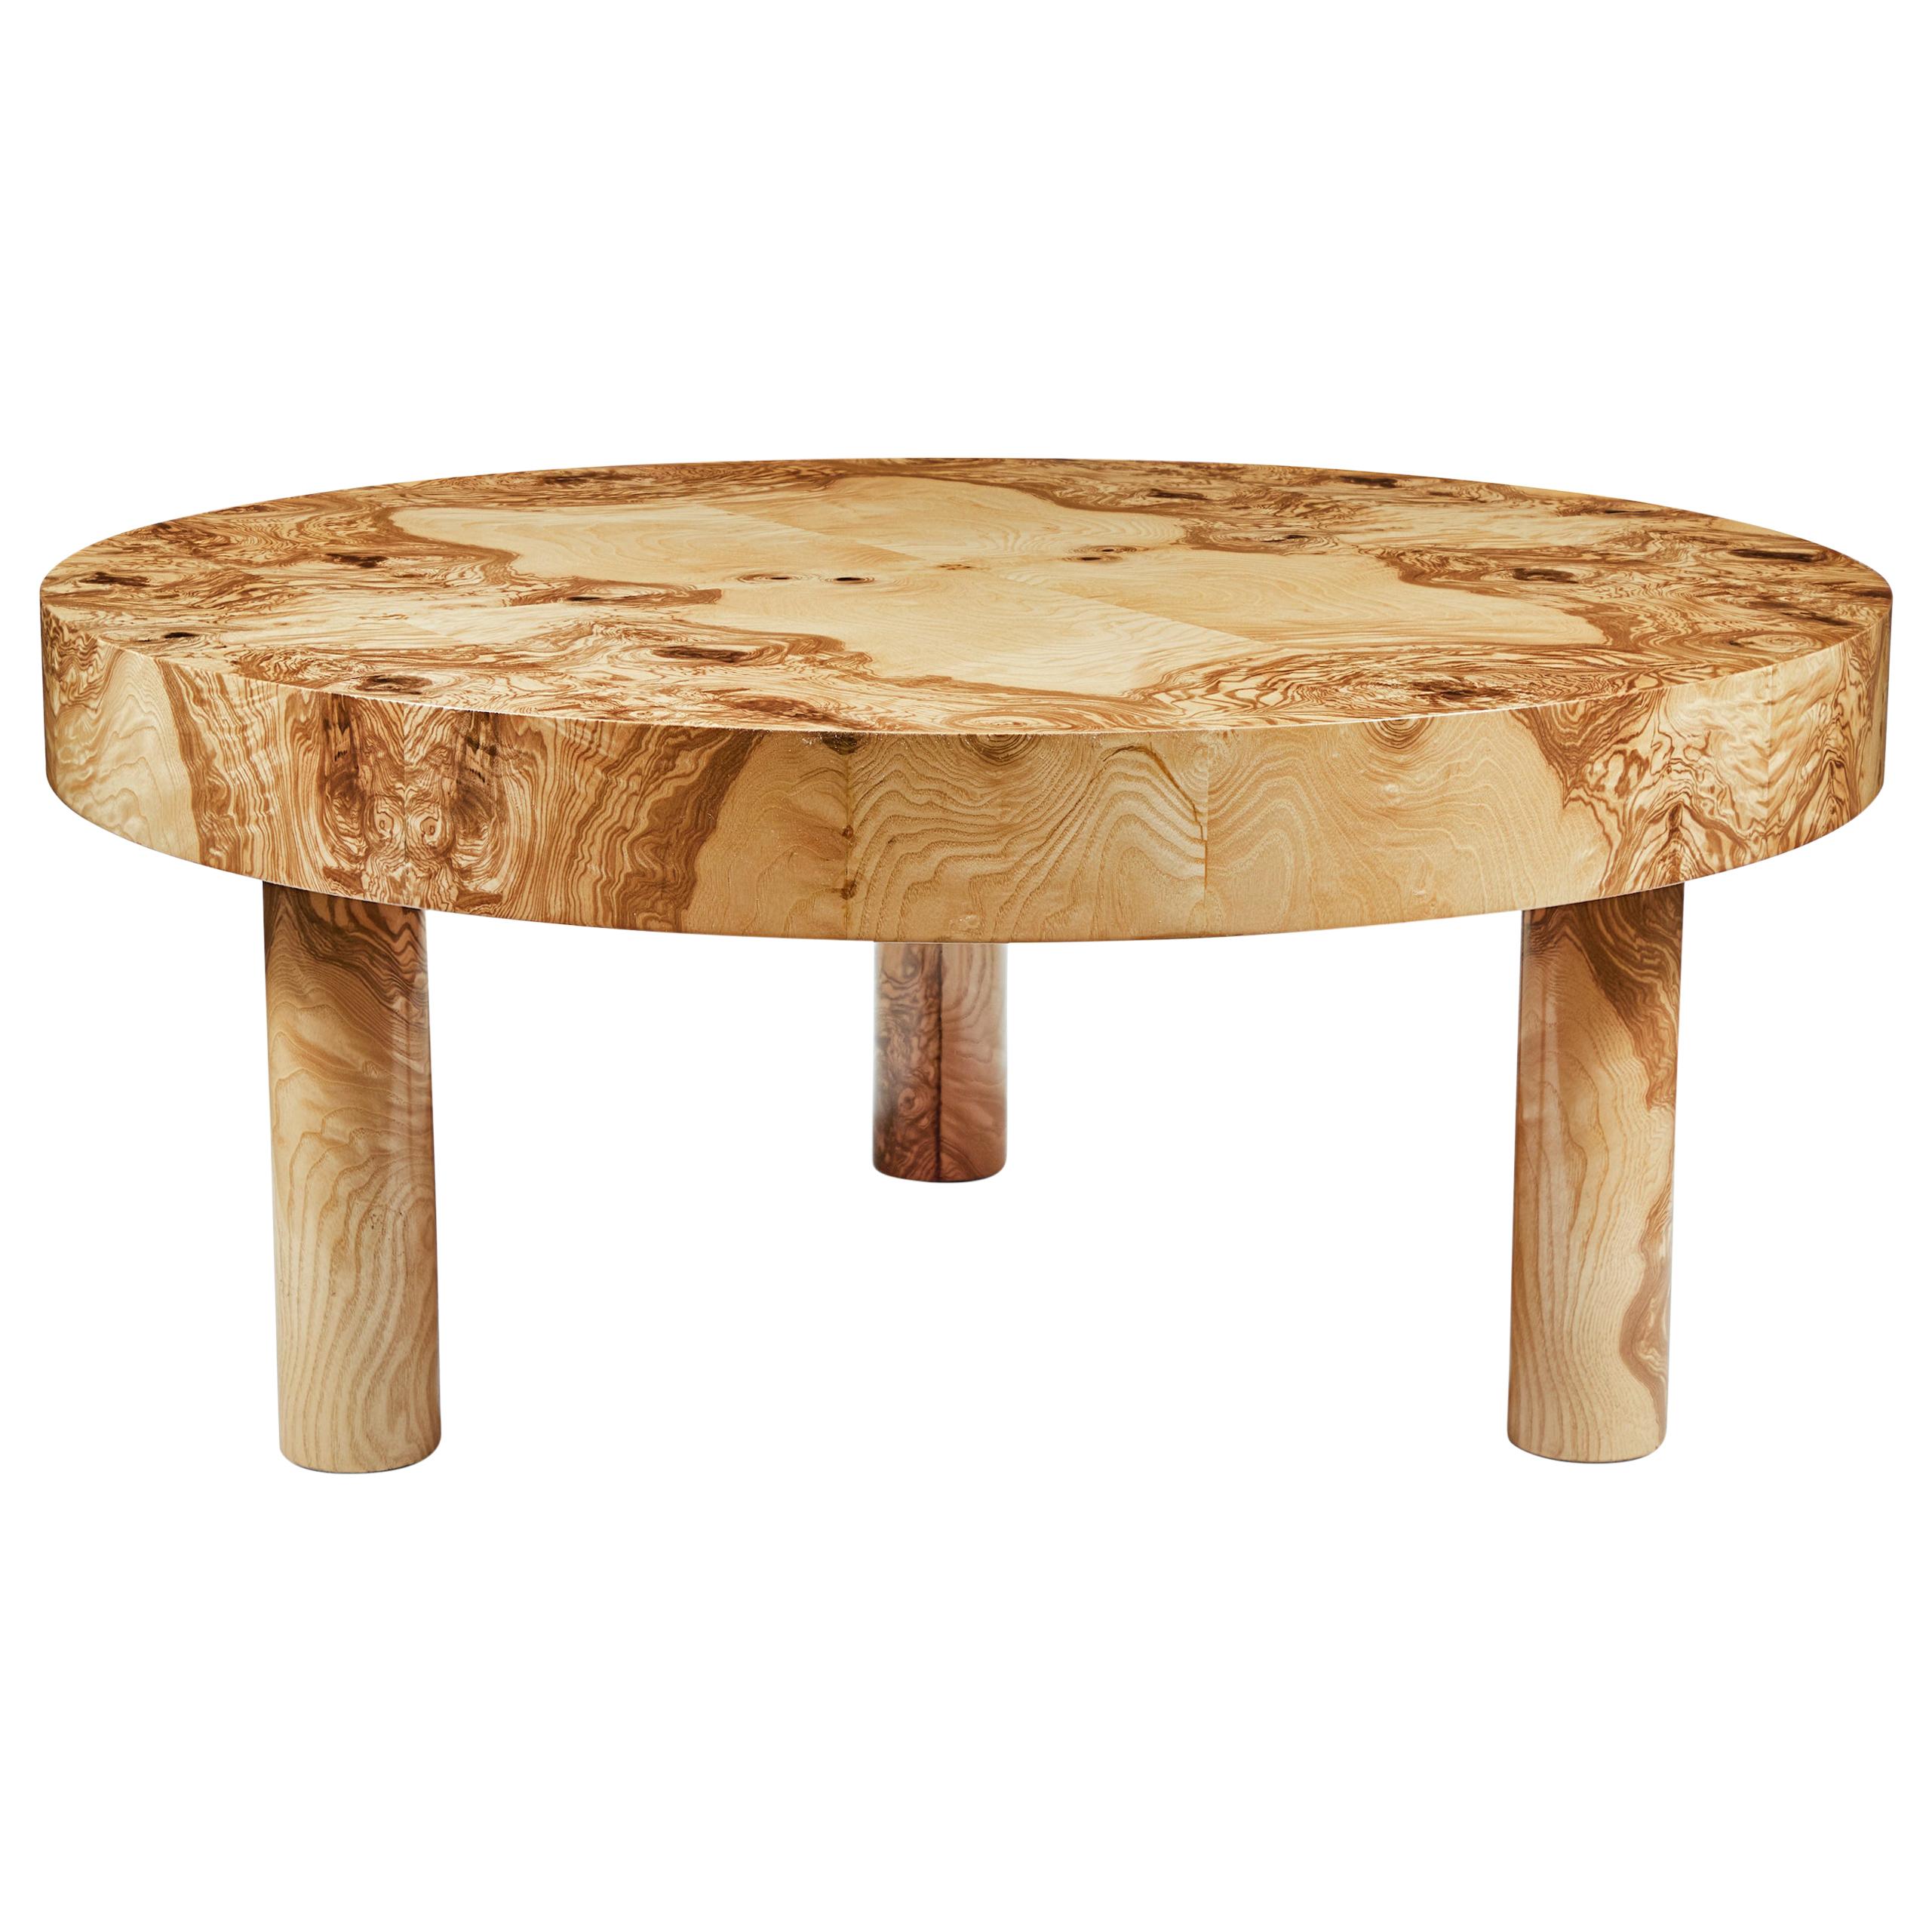 Carlton Coffee Table 36" DIA, in Natural Burl Wood, by August Abode